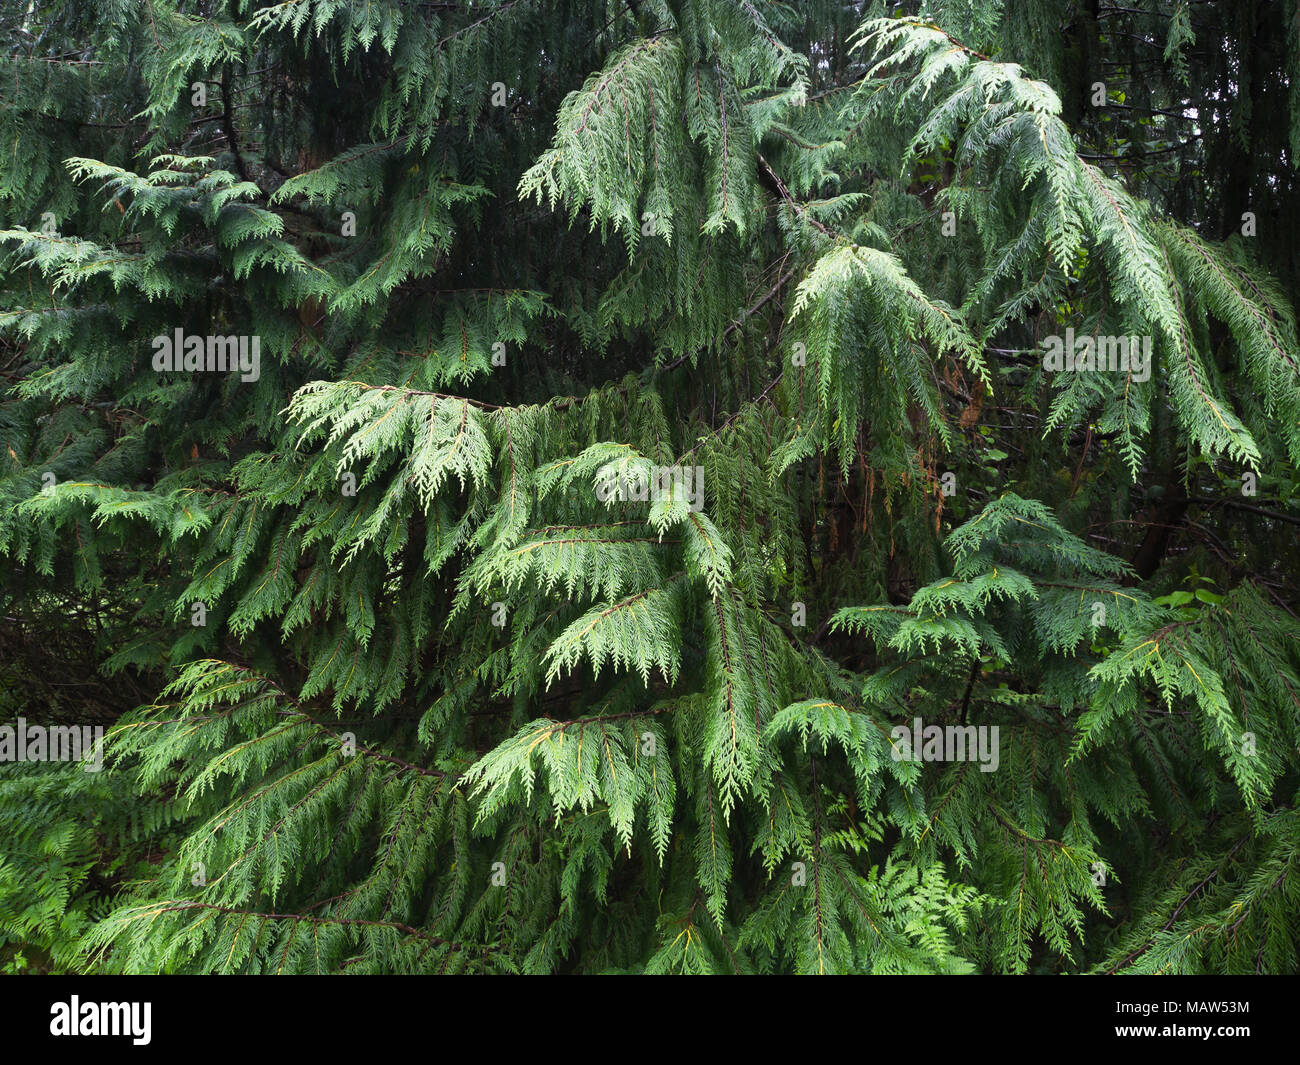 The Nootka cypress classed as Chamaecyparis nootkatensis or Cupressus nootkatensis, close up of foliage, the Rogaland Arboret park in Sandnes Norway Stock Photo